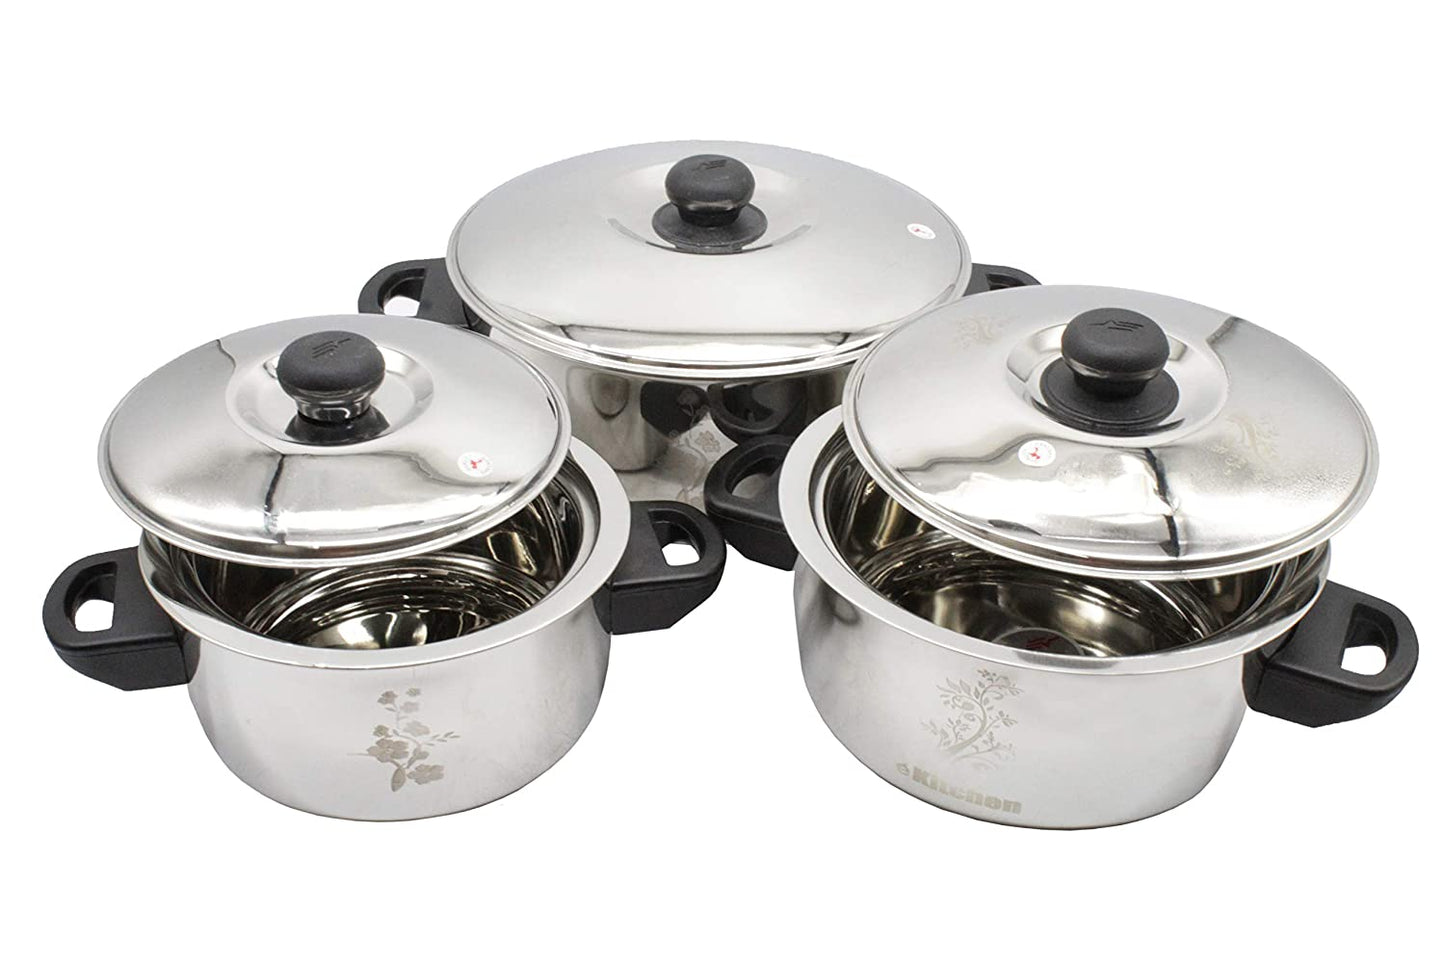 Evasilva Stainless Steel Double Walled Casserole | Hot Box Sets